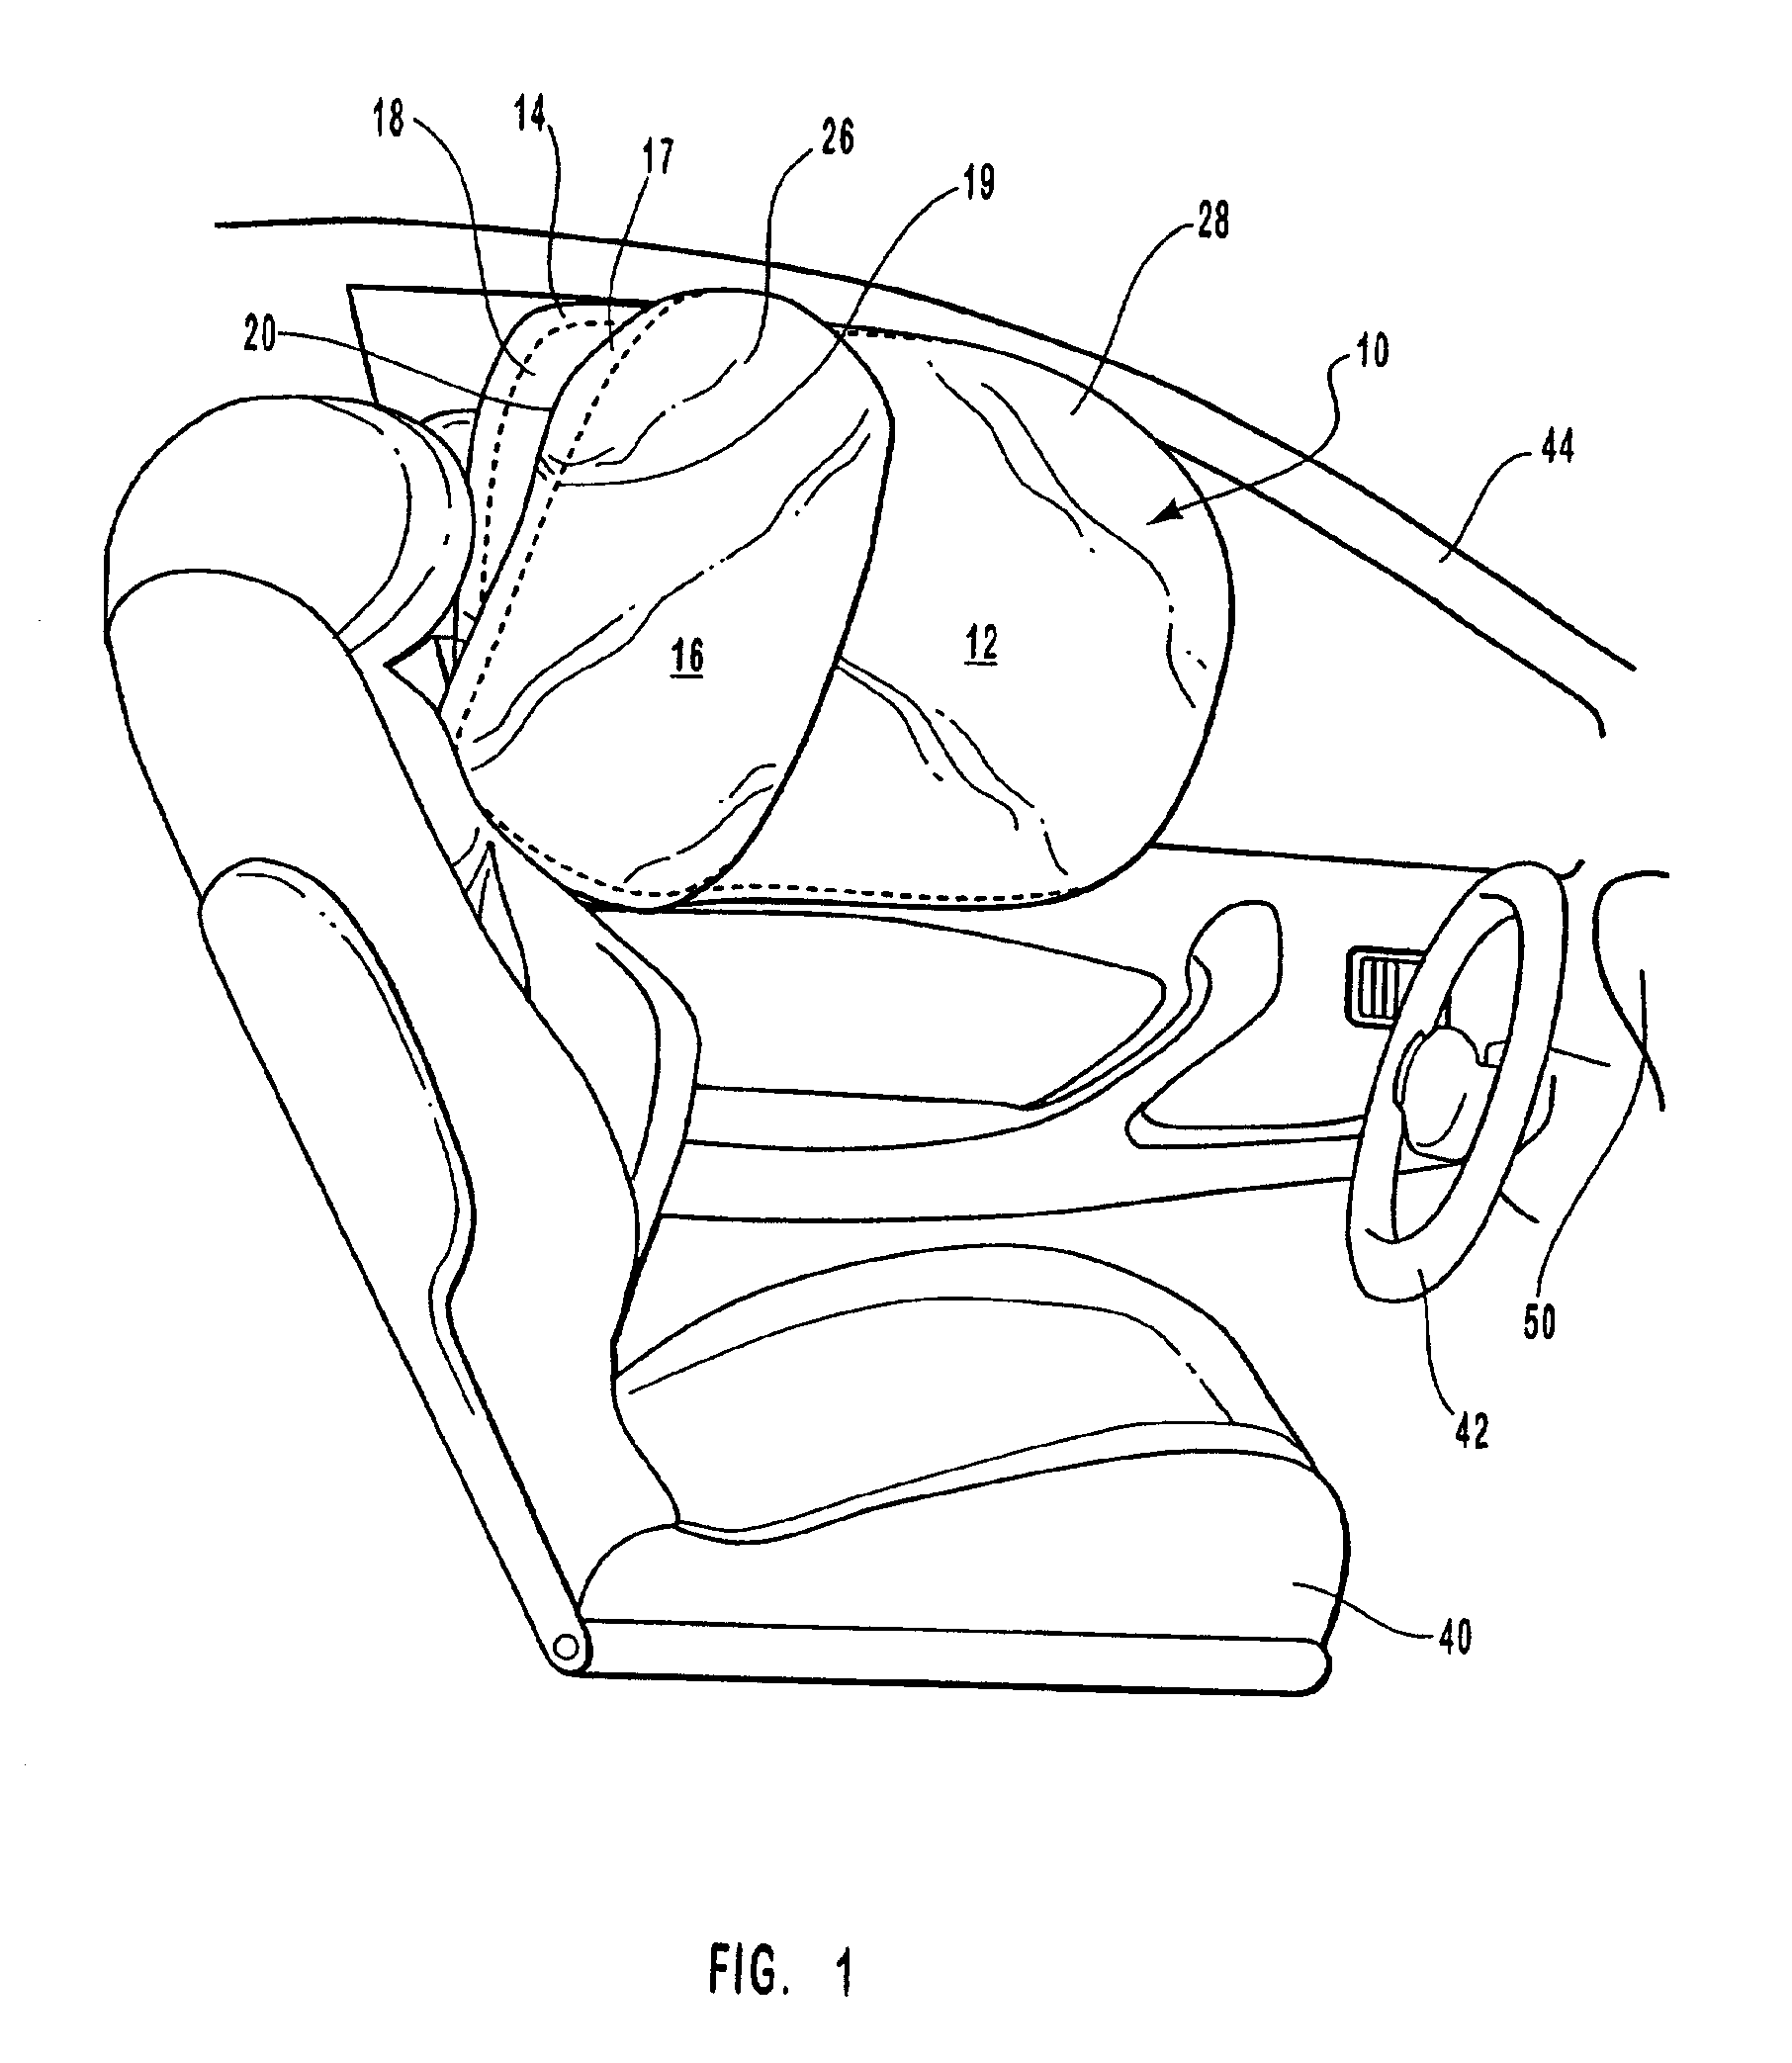 Side-impact, variable thickness vehicular airbag